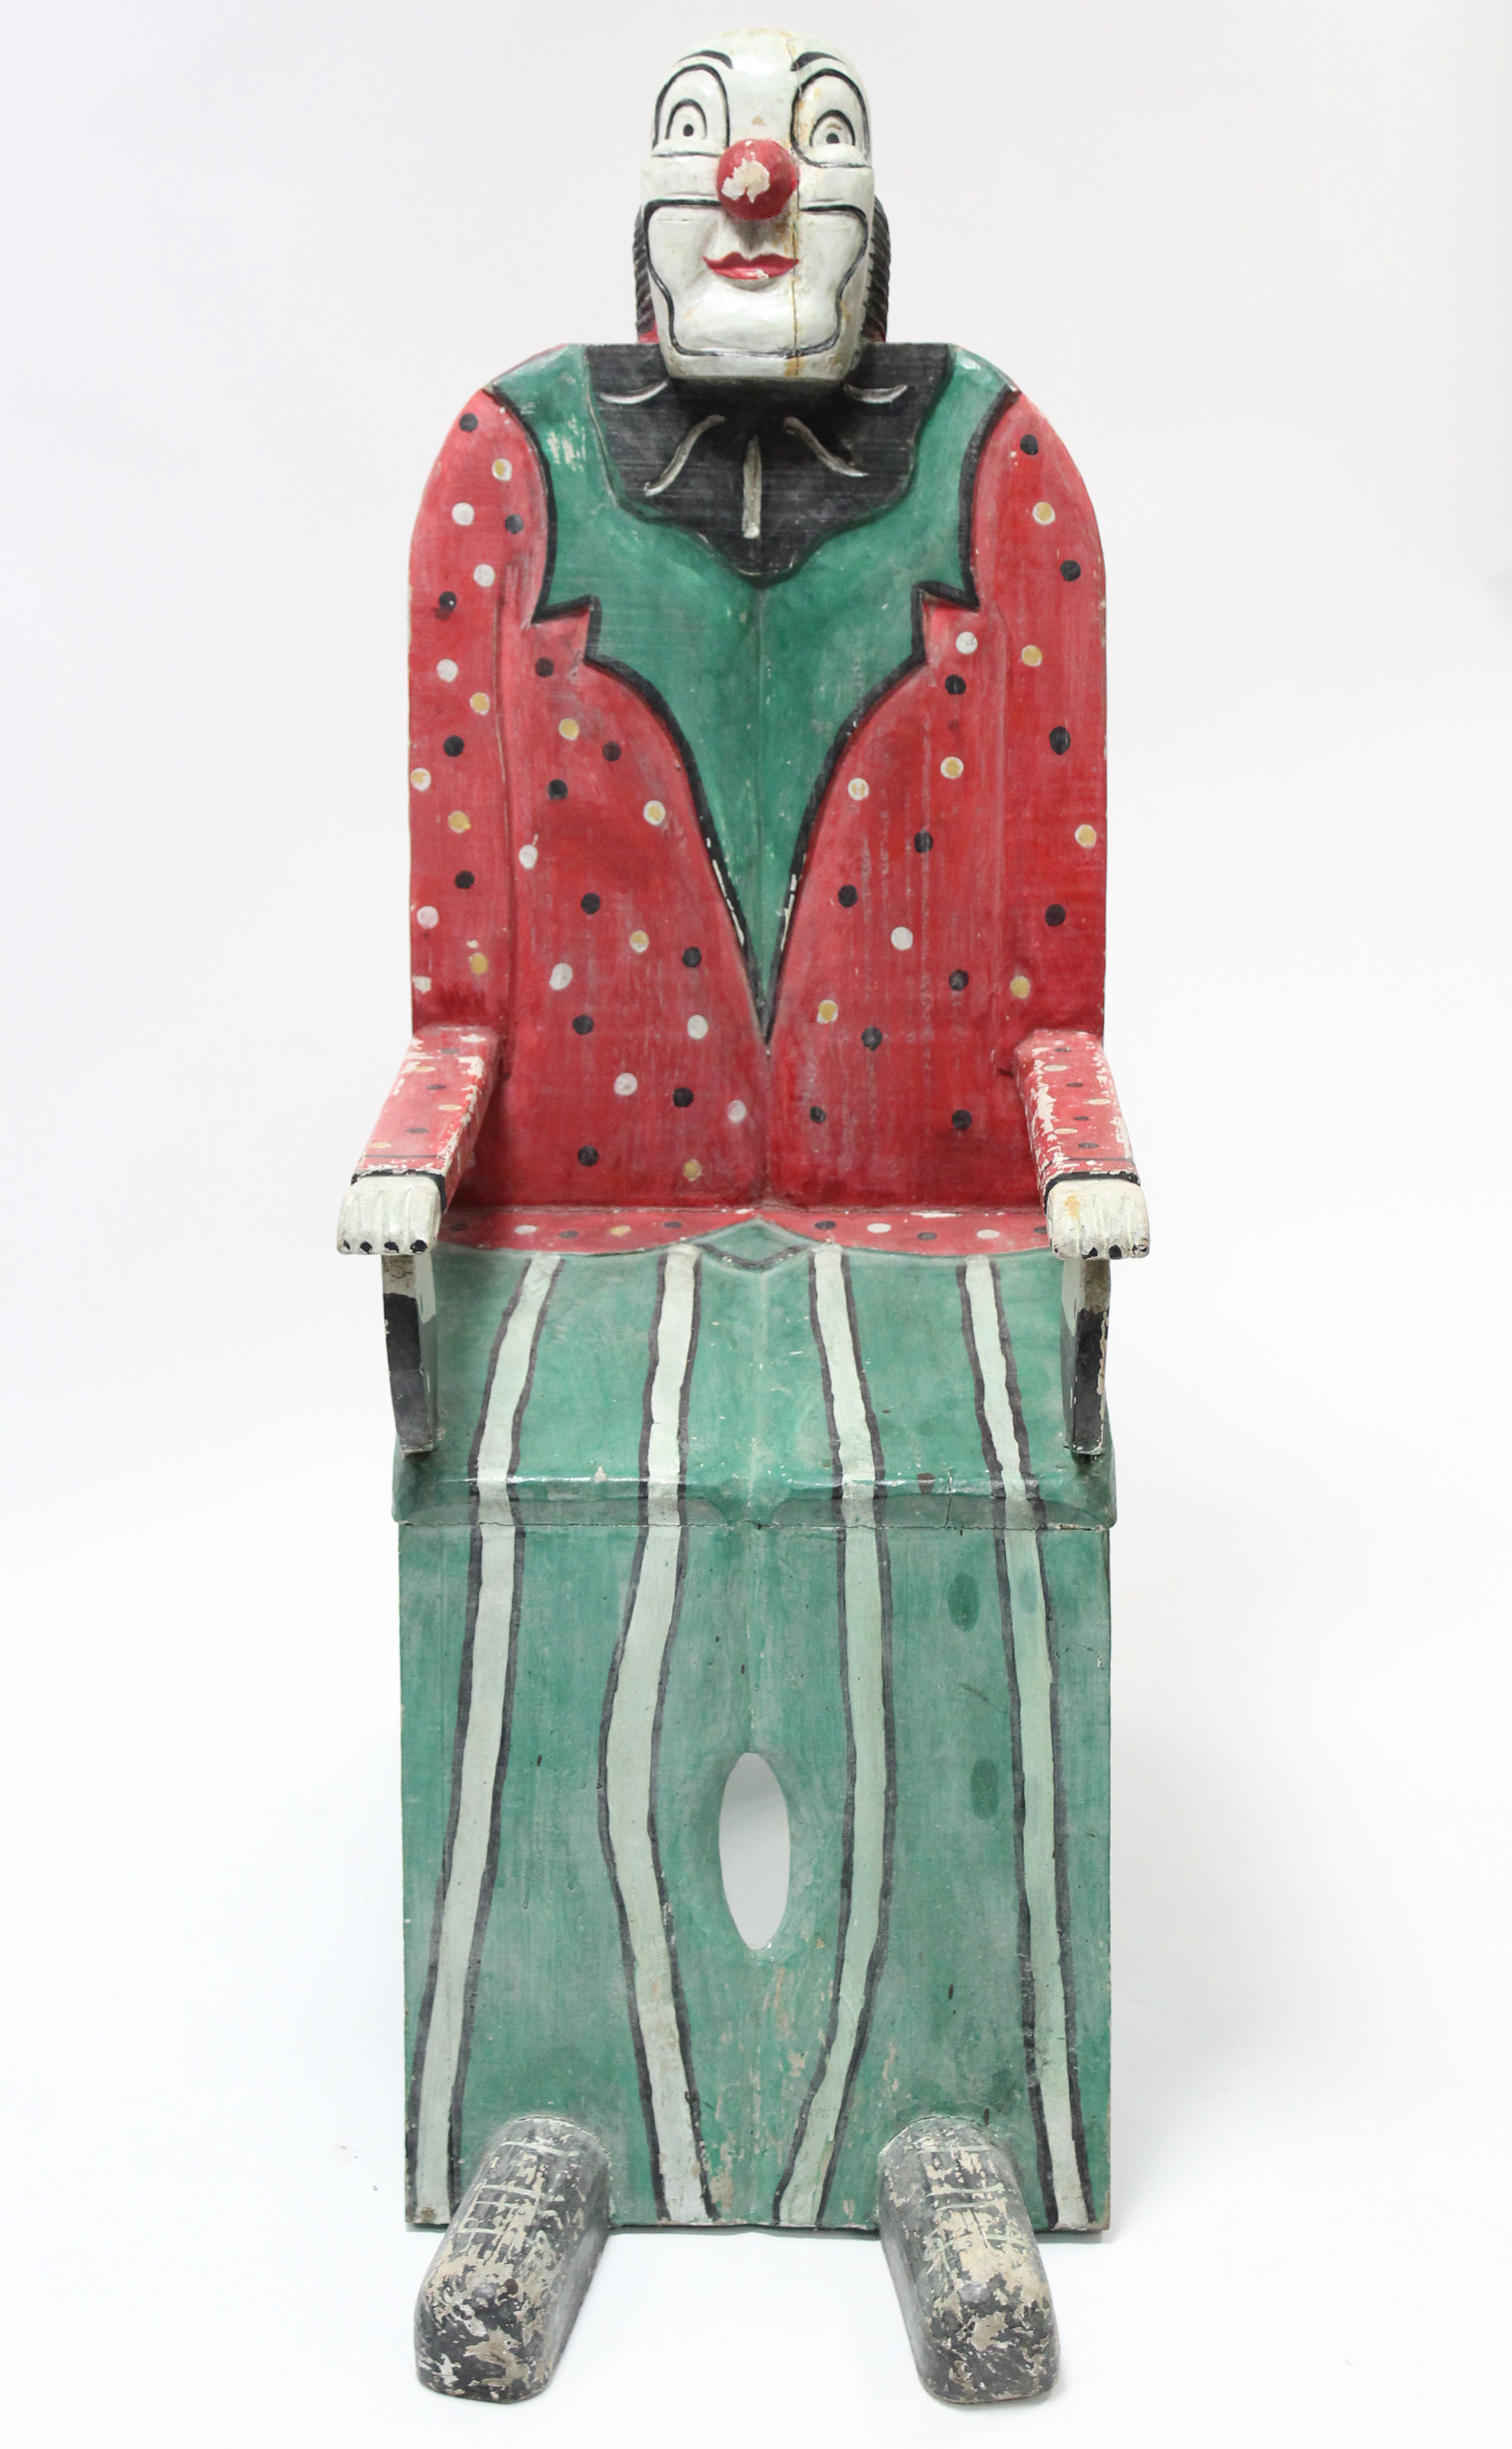 AN EARLY/MID 20th CENTURY PAINTED WOODEN NOVELTY CIRCUS/FAIRGROUND “CLOWN” CHAIR, 42½” HIGH. - Image 3 of 7